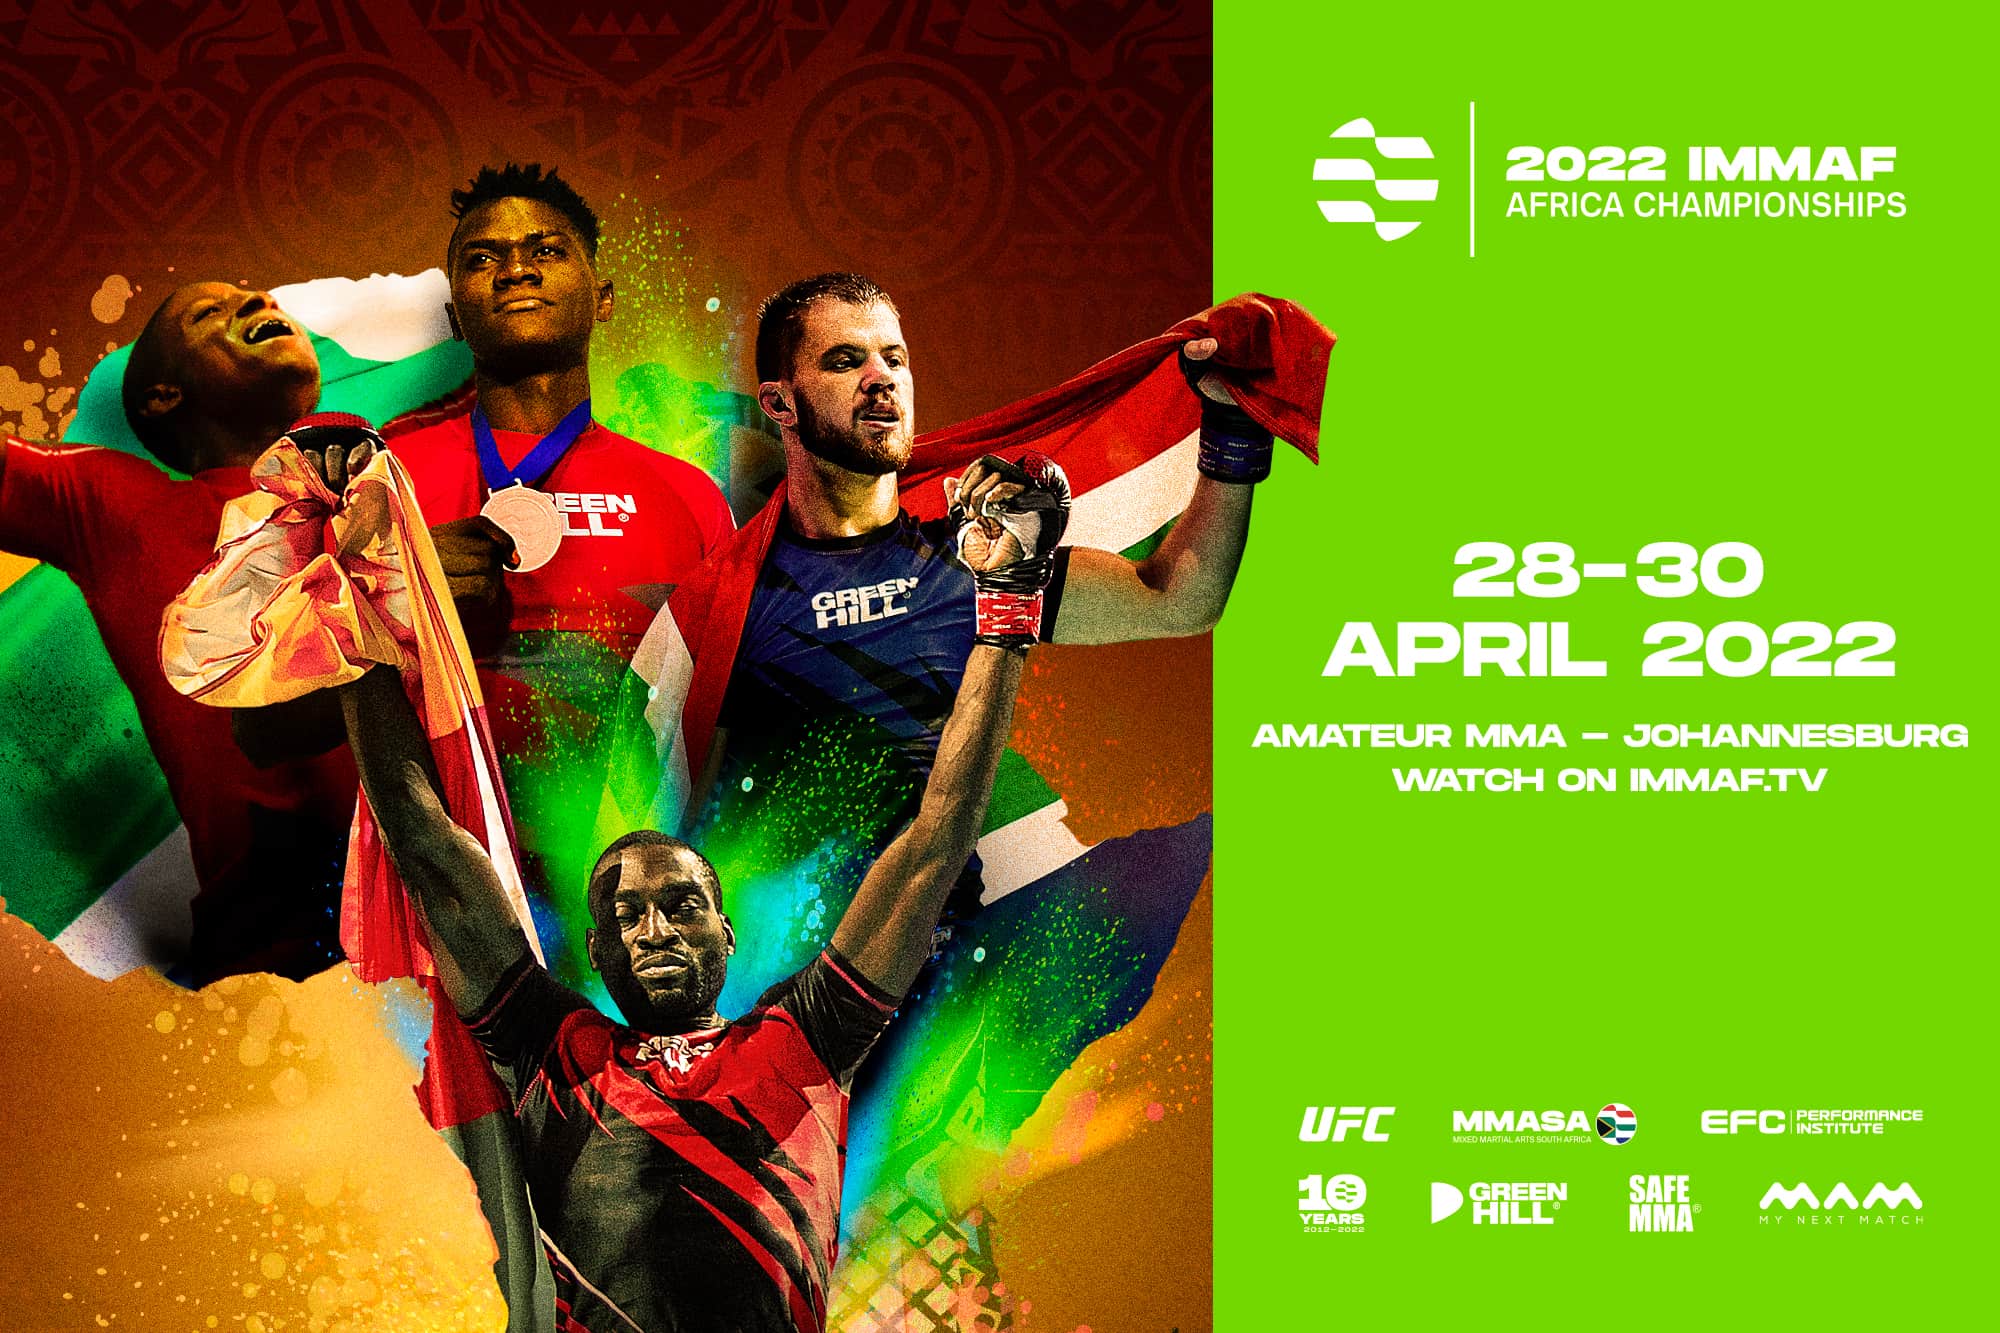 Watch IMMAF Africa Championships live at IMMAF.TV